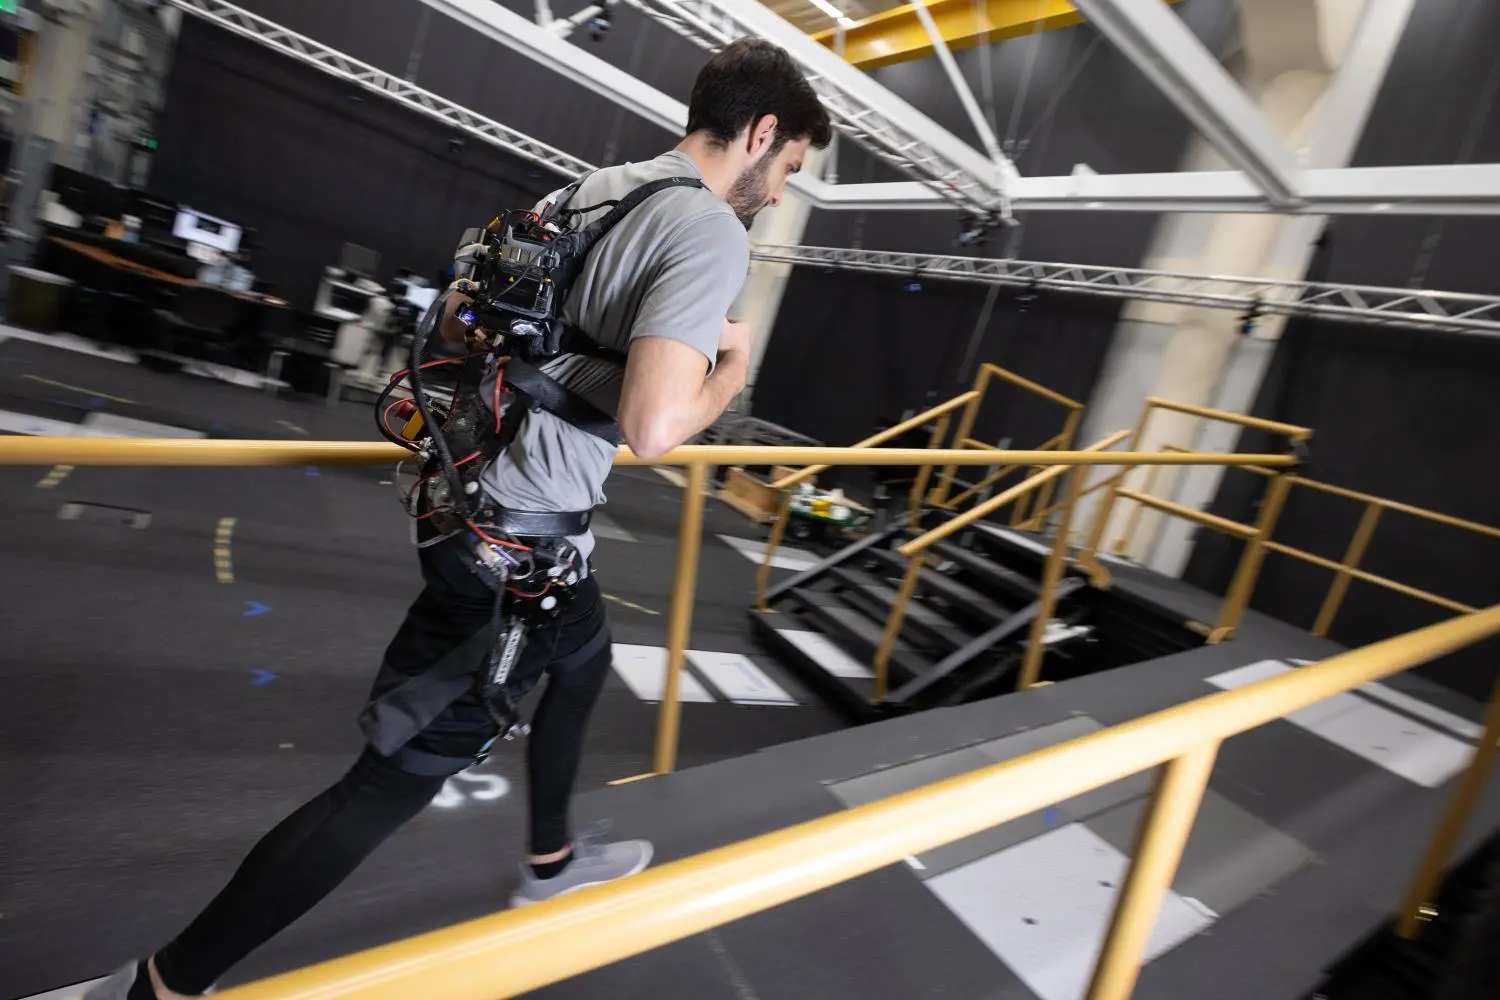 Dean Molinaro walks up a height-adjustable ramp, left, and similarly adjustable stairs, right, while wearing an experimental exoskeleton.